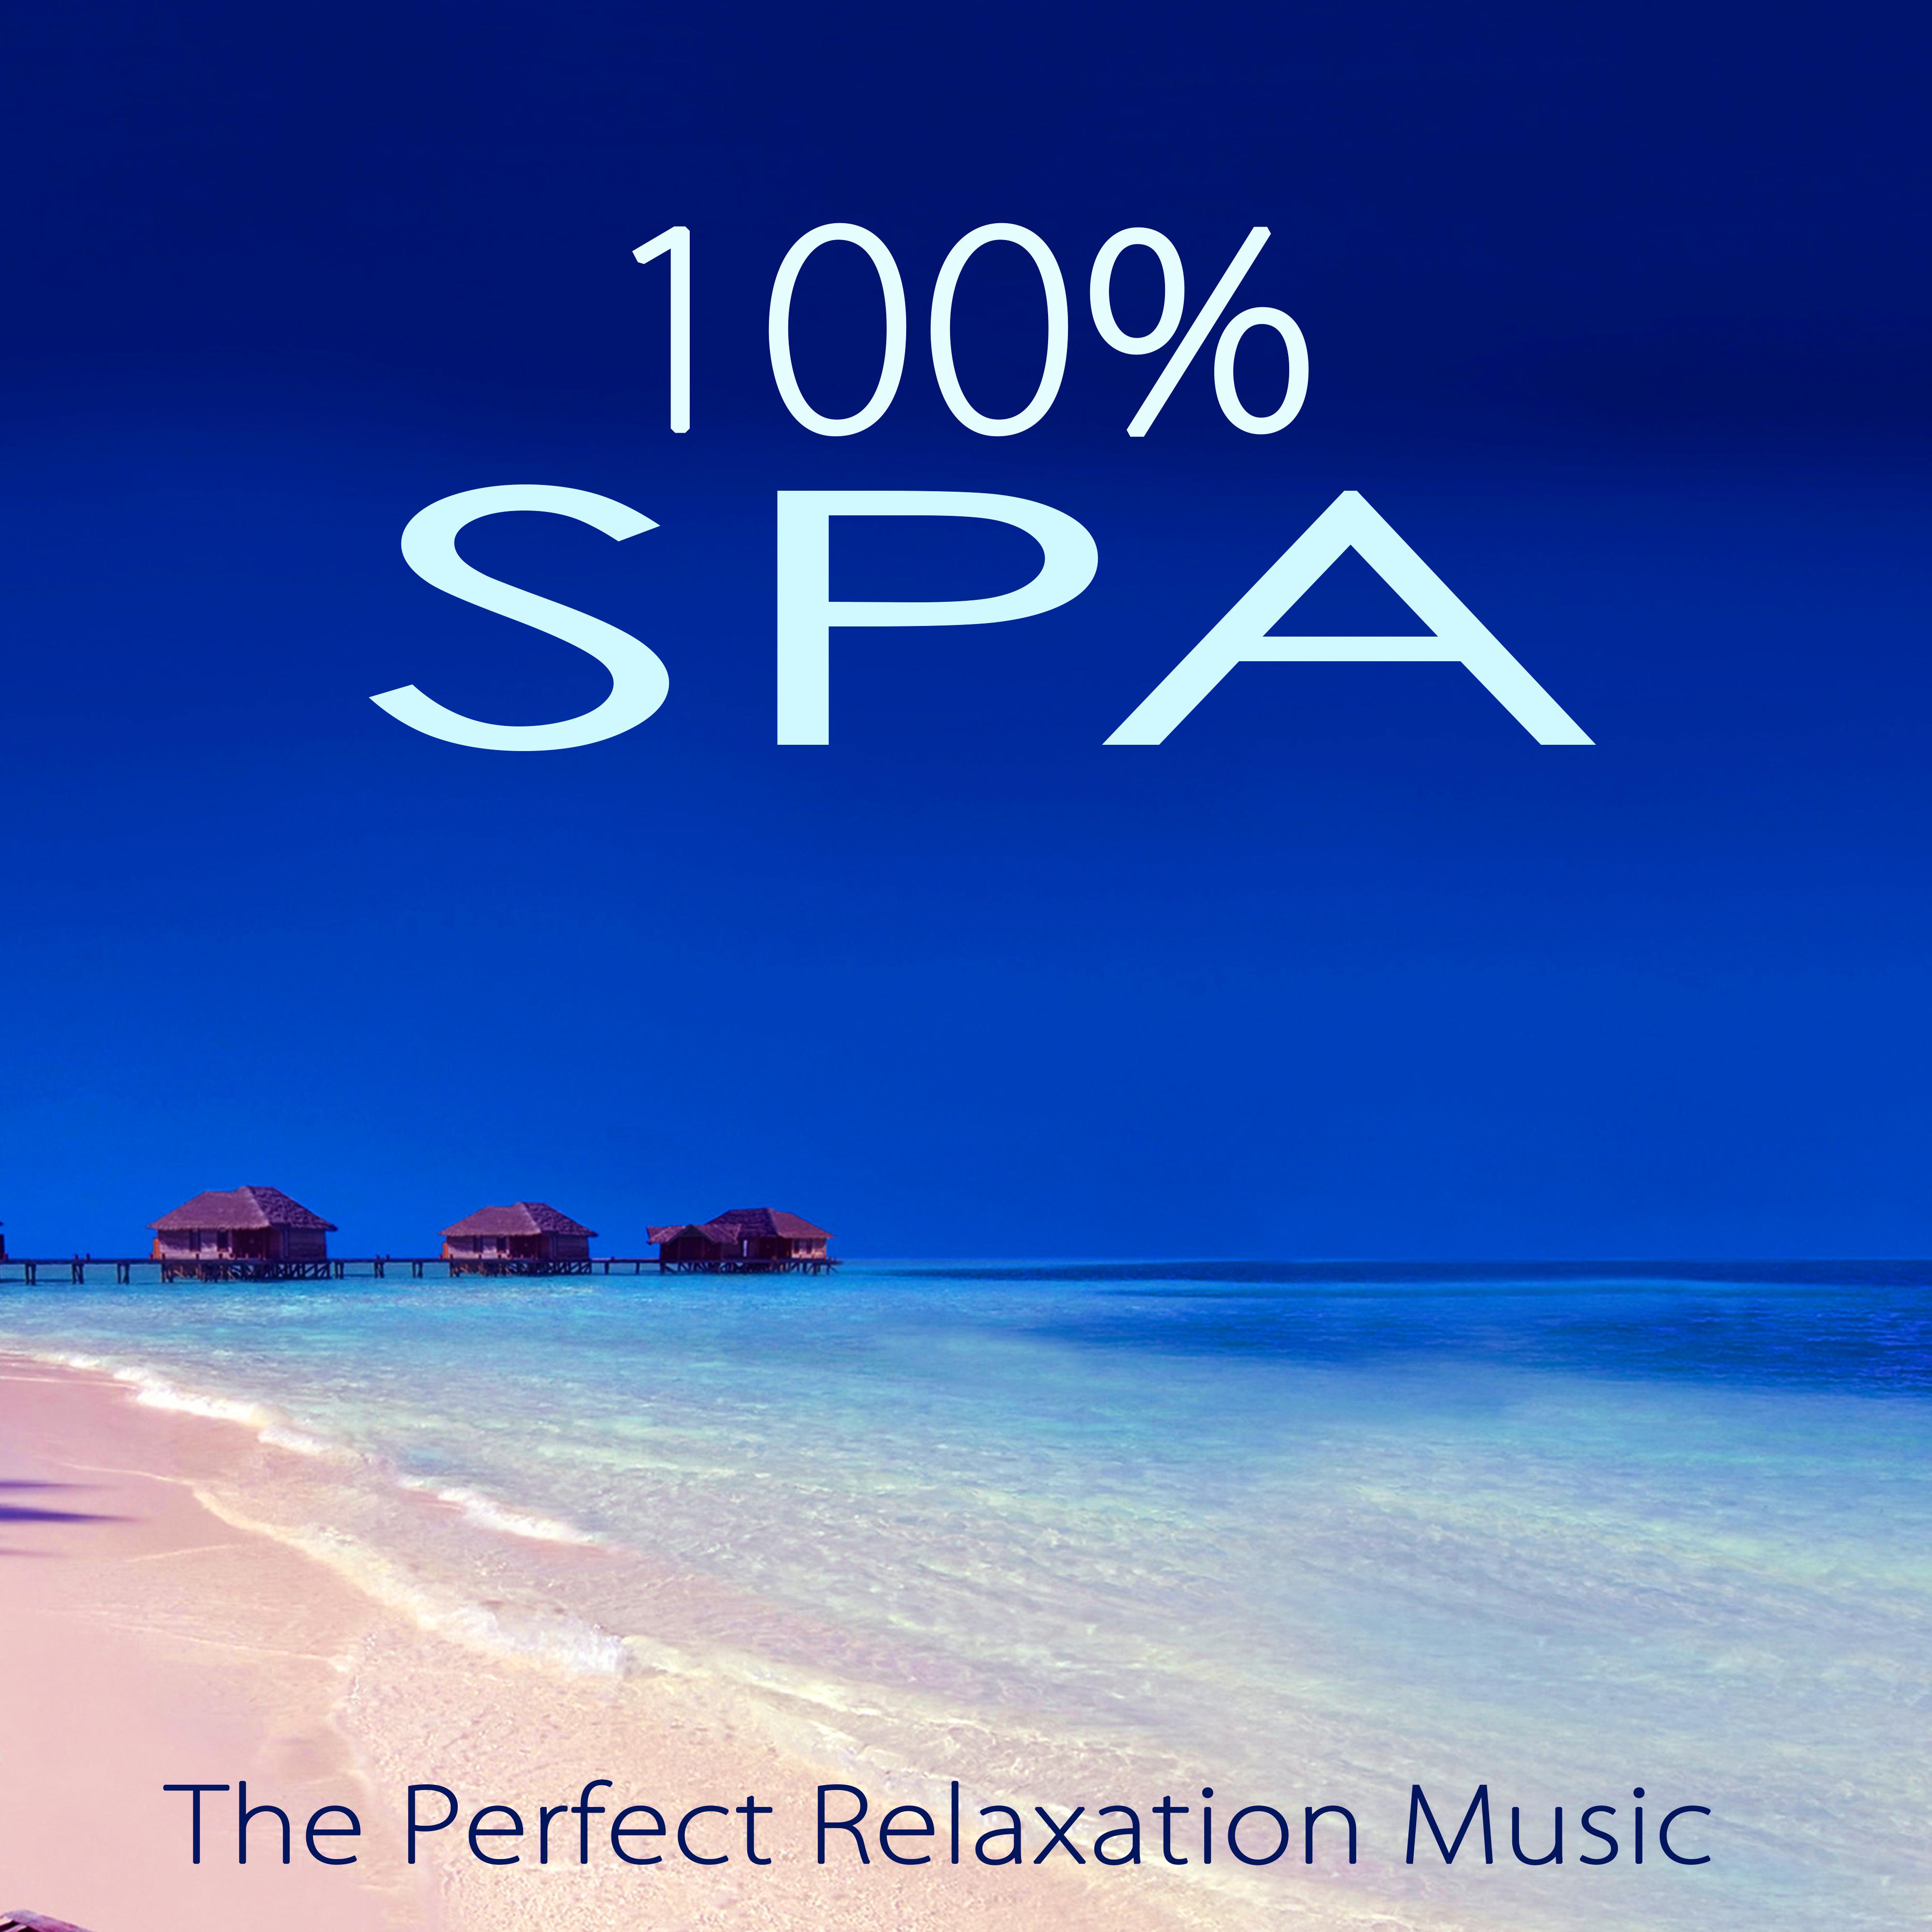 100 Spa  The Perfect Relaxation Music for Spa Treatments in Luxury Hotels  Resorts